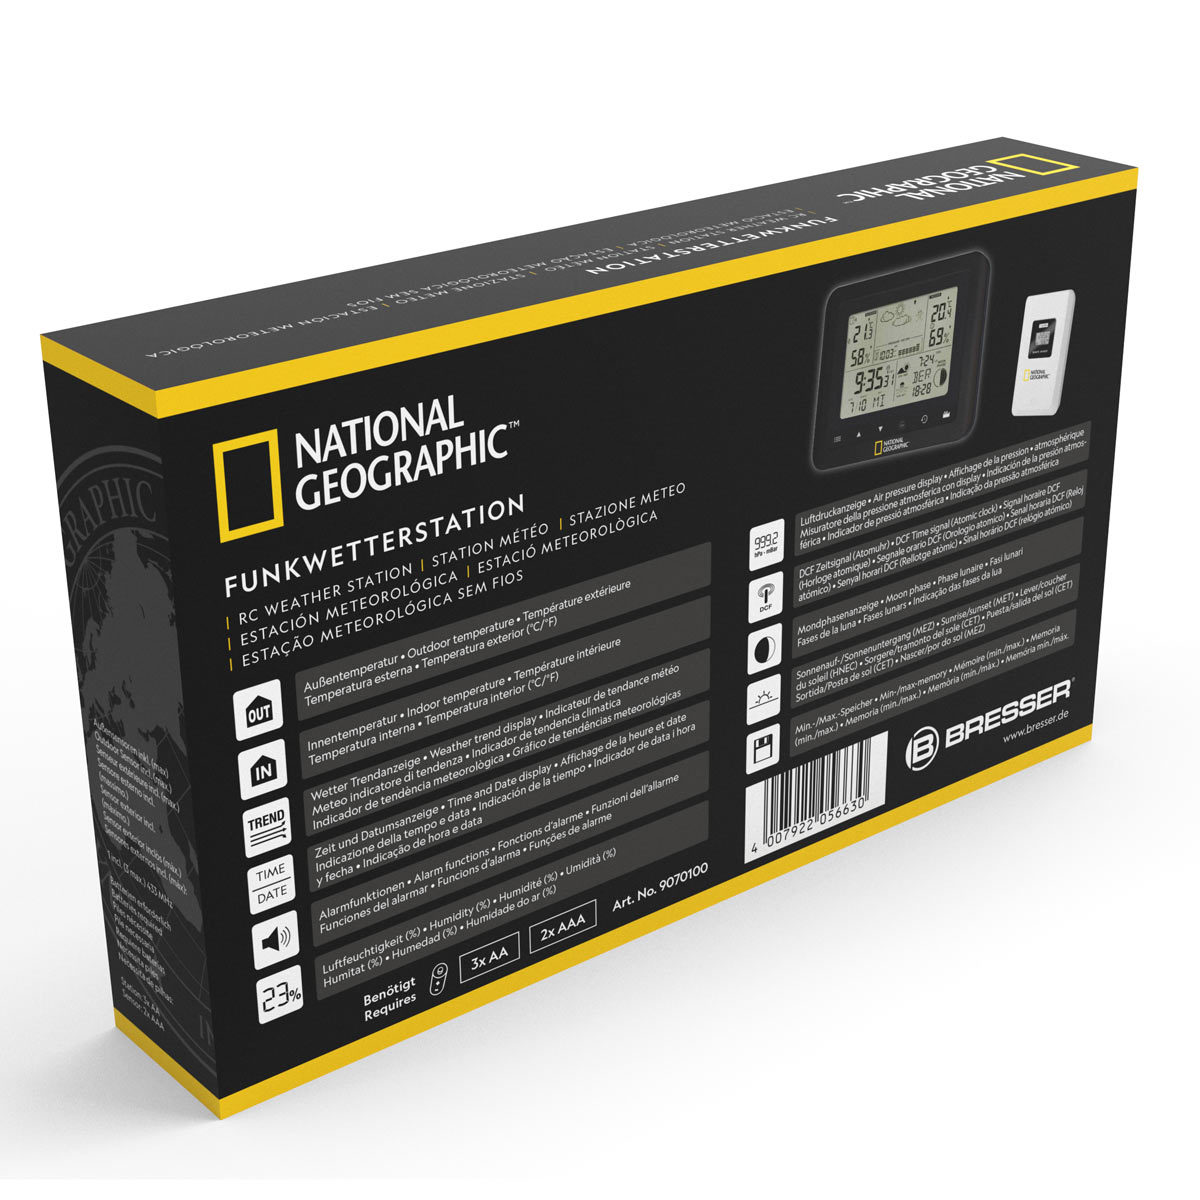 National geographic weather station packaging